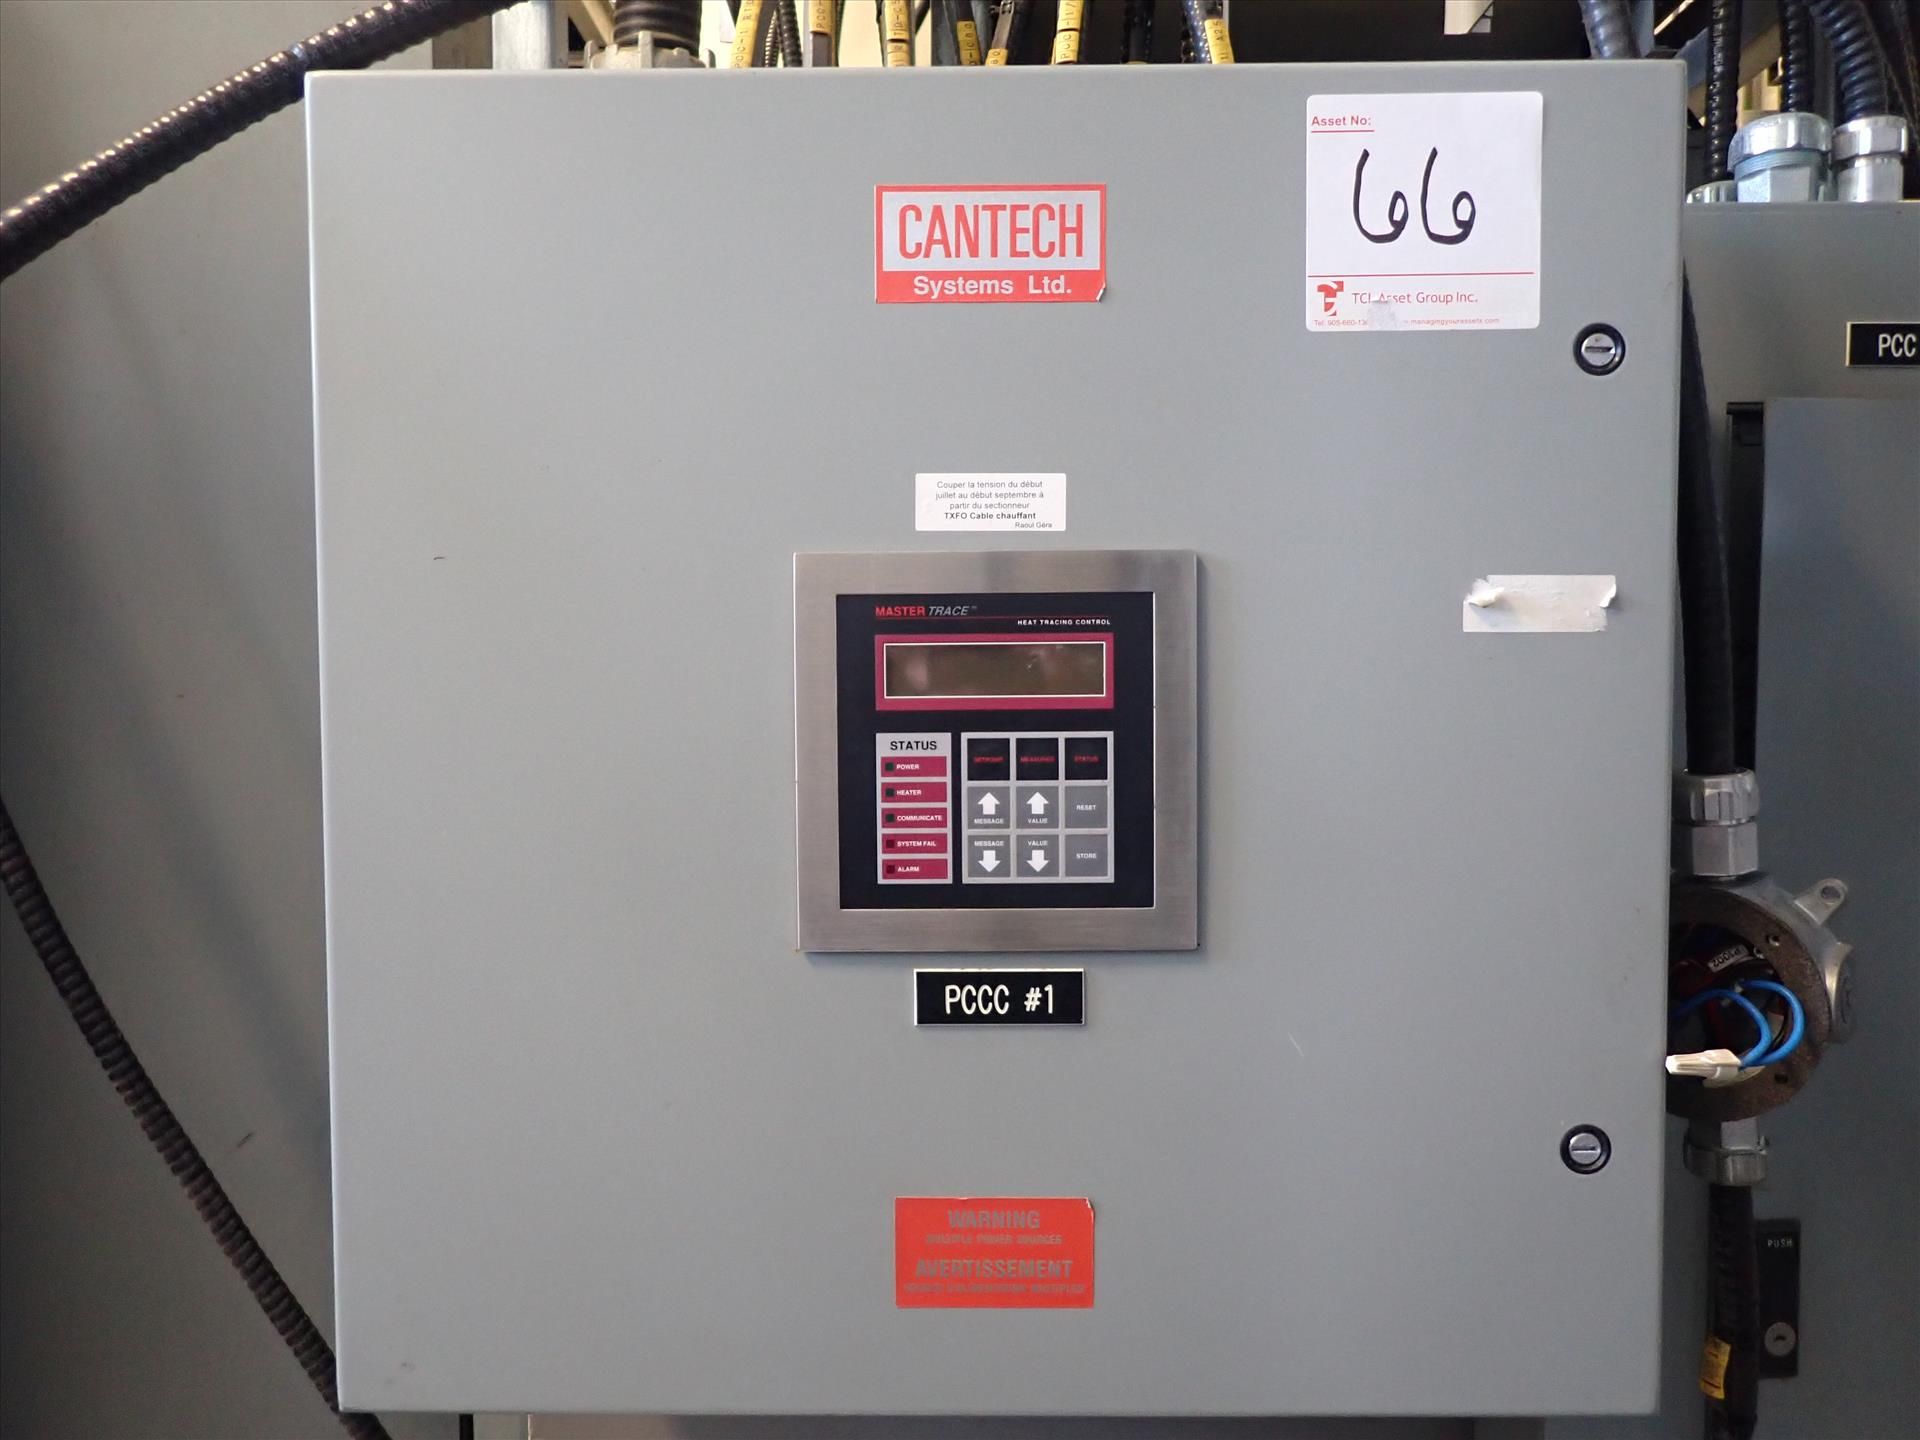 Cantech MasterTrace heat tracing control panel